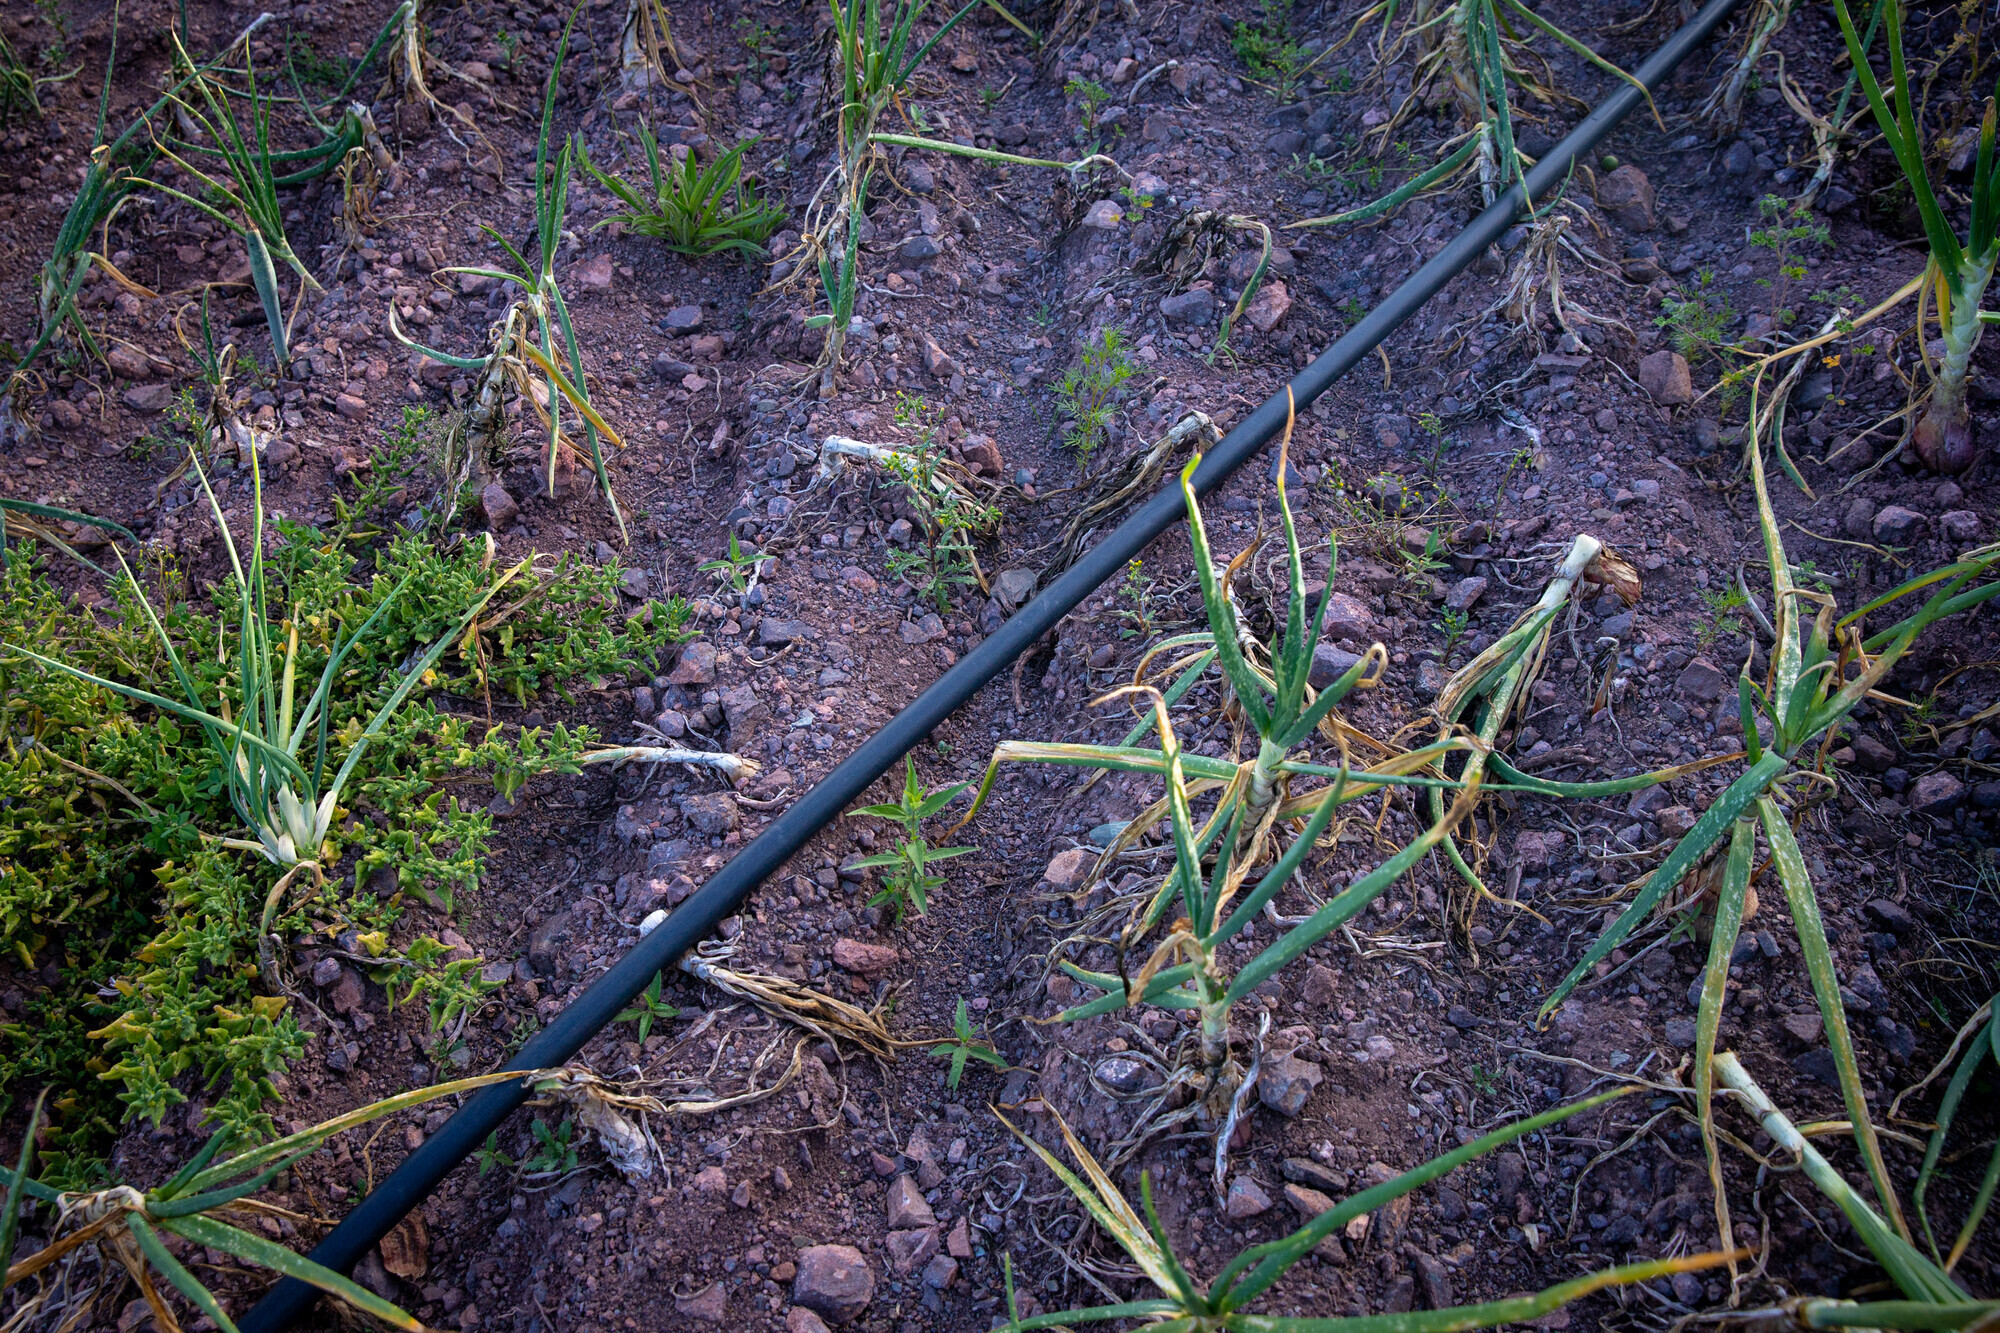 An irrigation system in a field